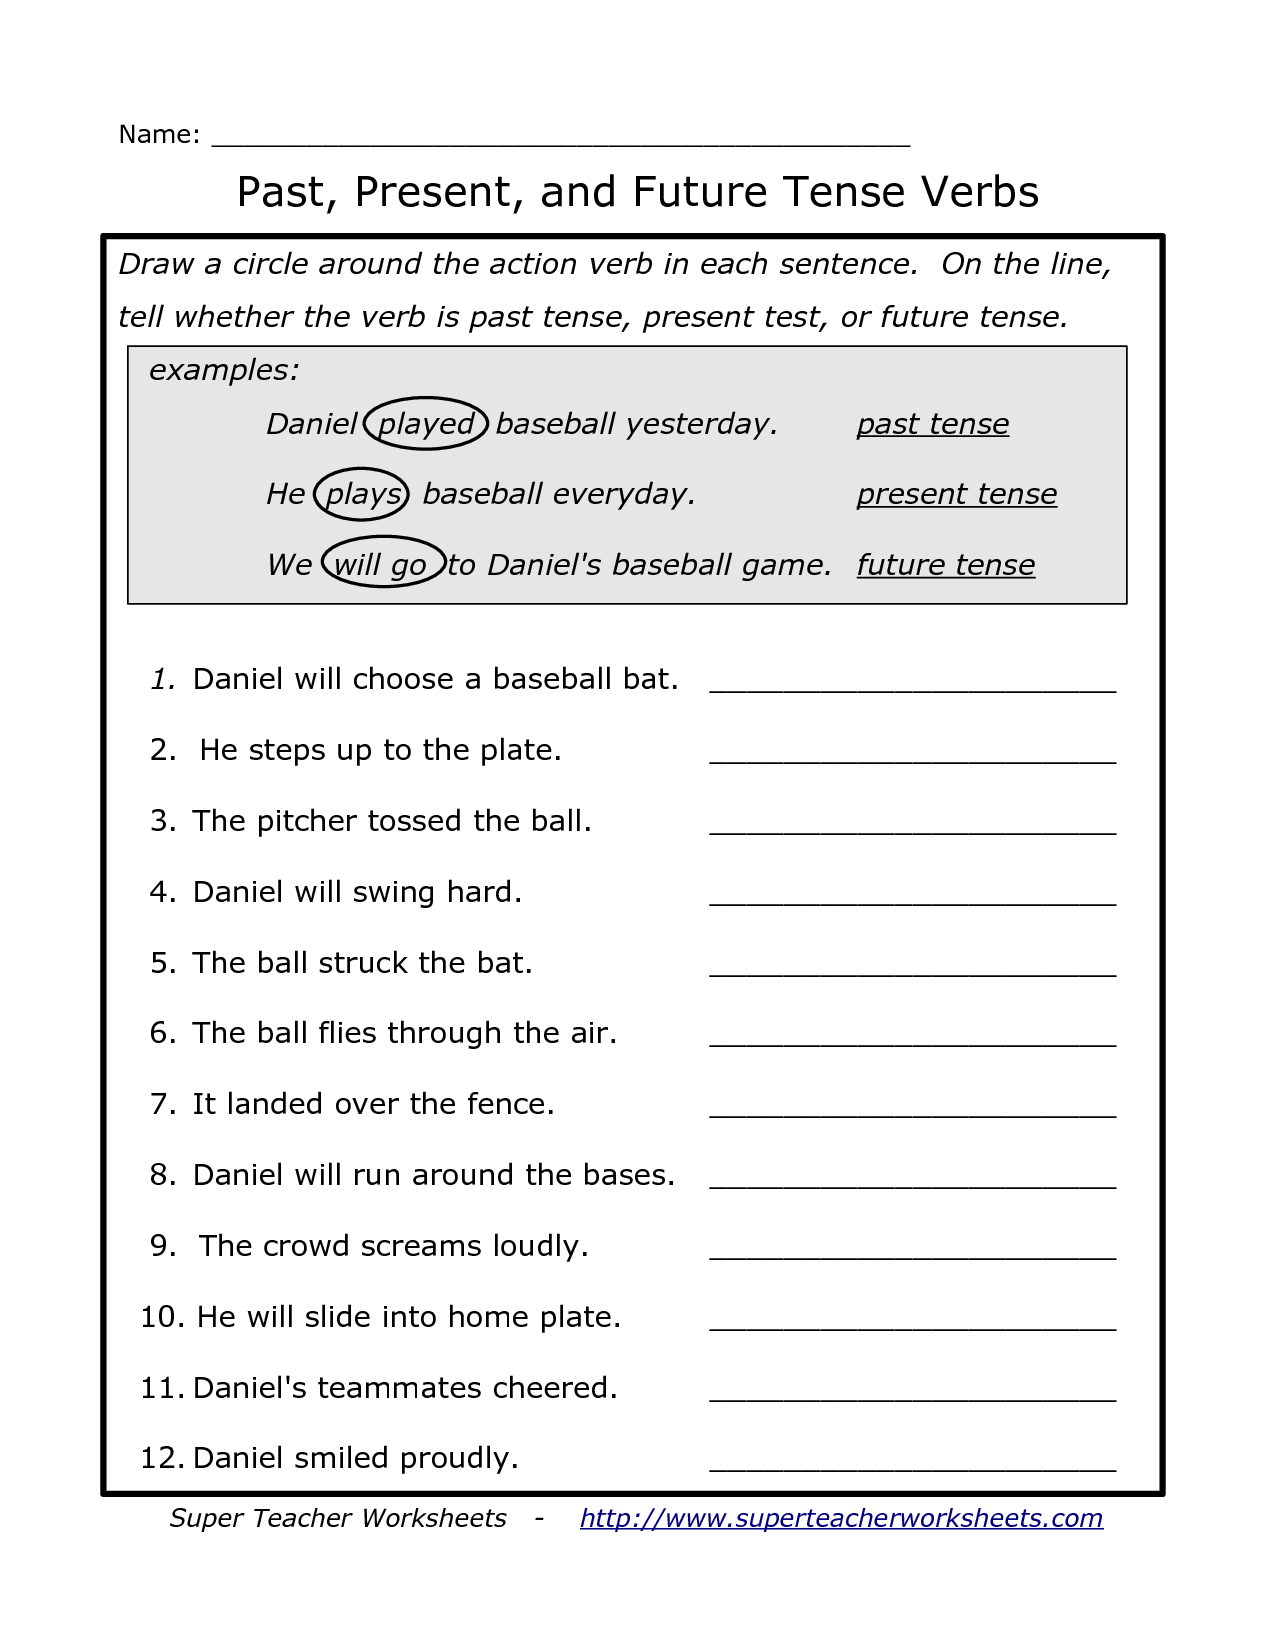 Past Present and Future Tense Worksheets Image